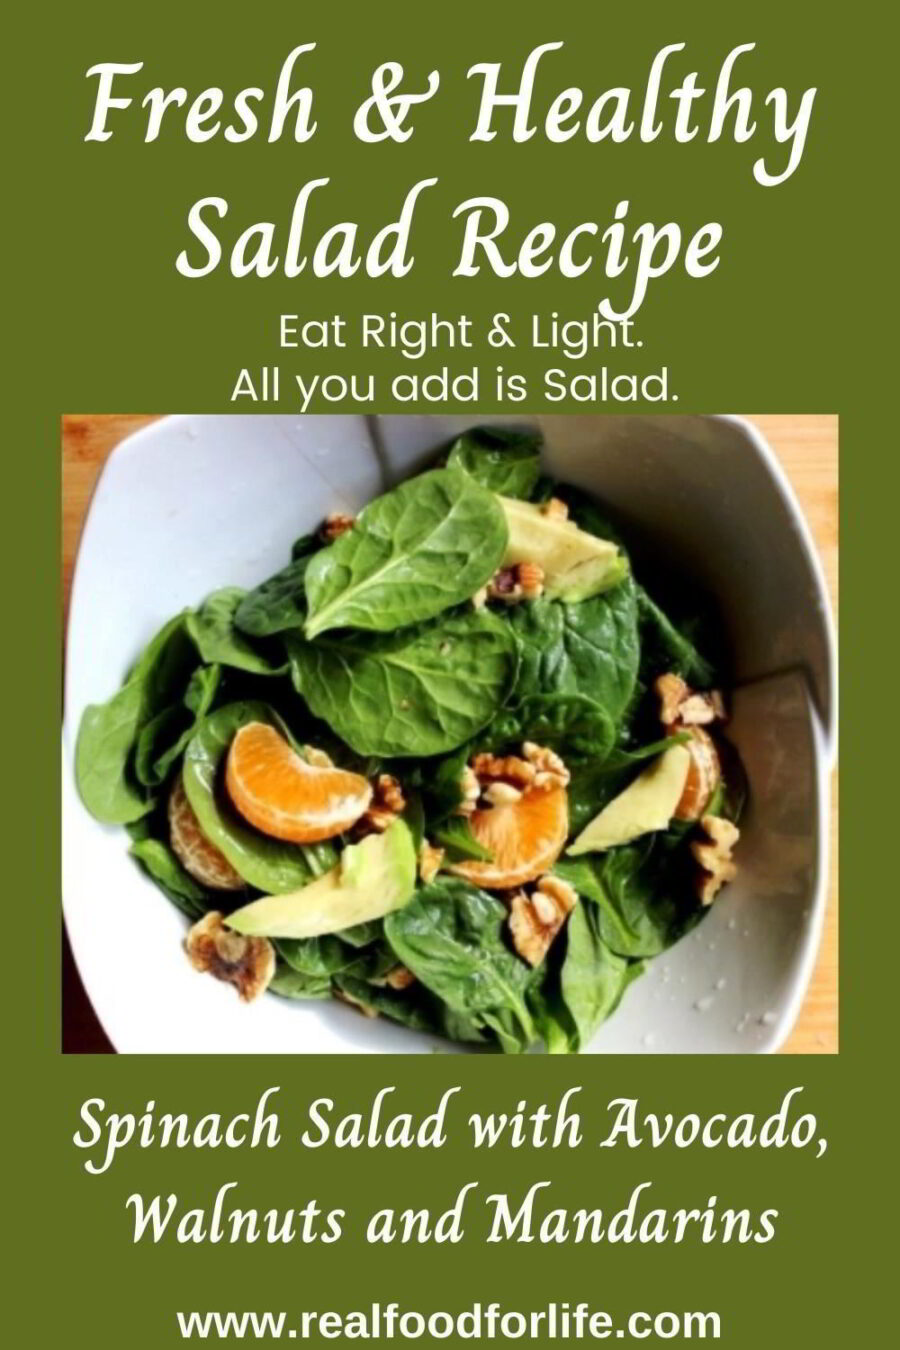 Spinach Salad With Walnuts